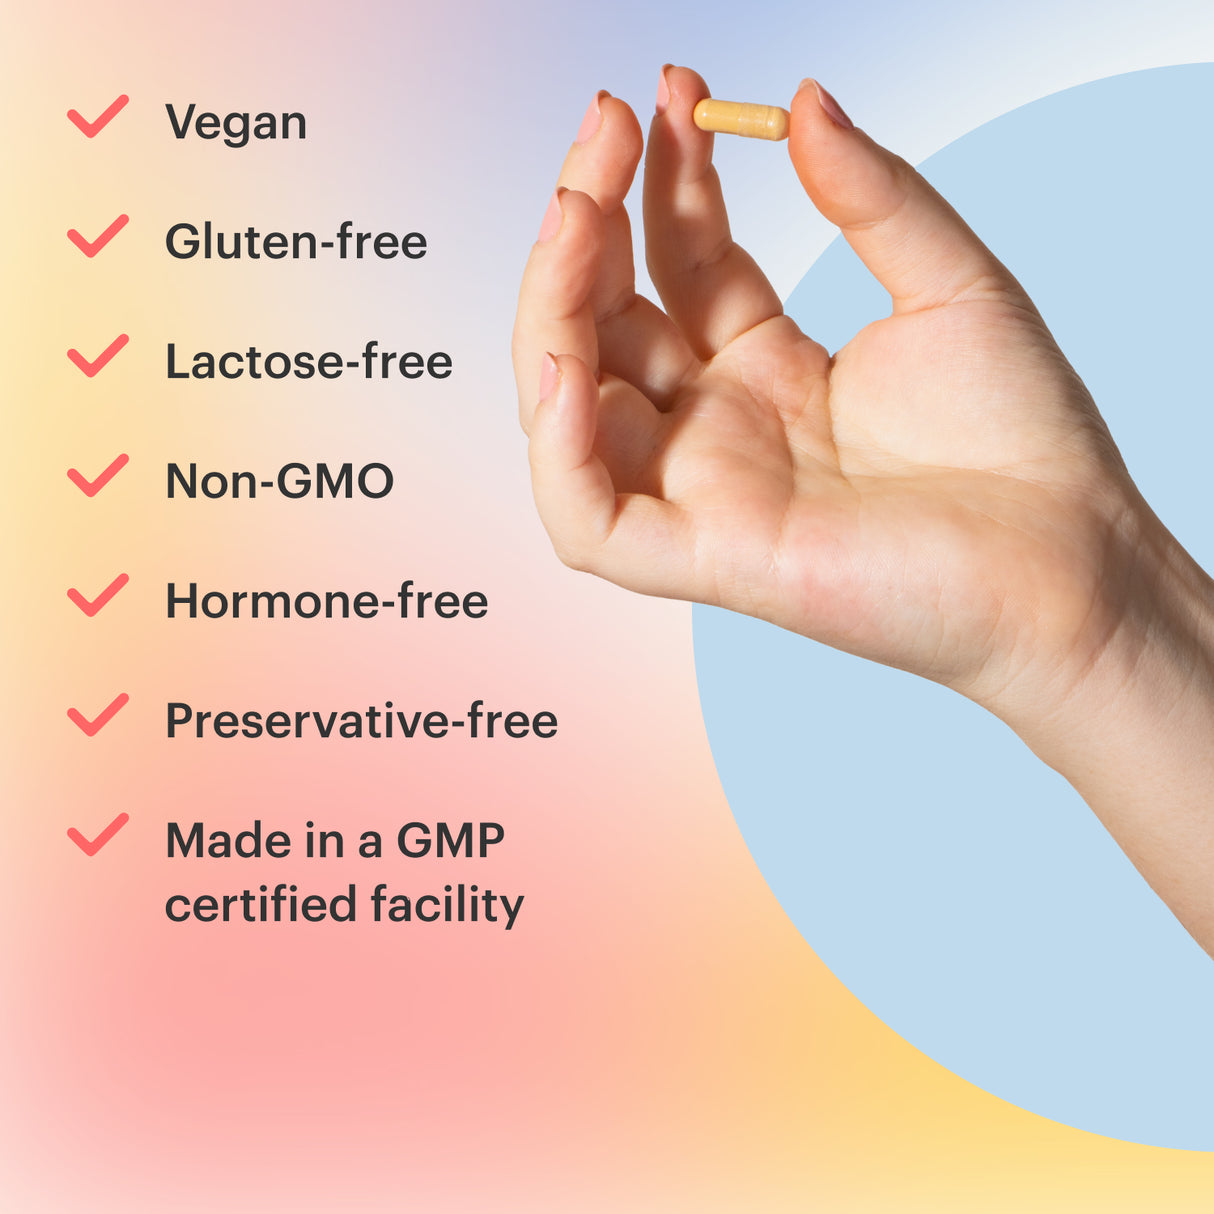 List of supplement benefit: vegan, gluten-free, lactose-free, non-GMO, hormone-free, preservative-free. Made in a GMP certified facility